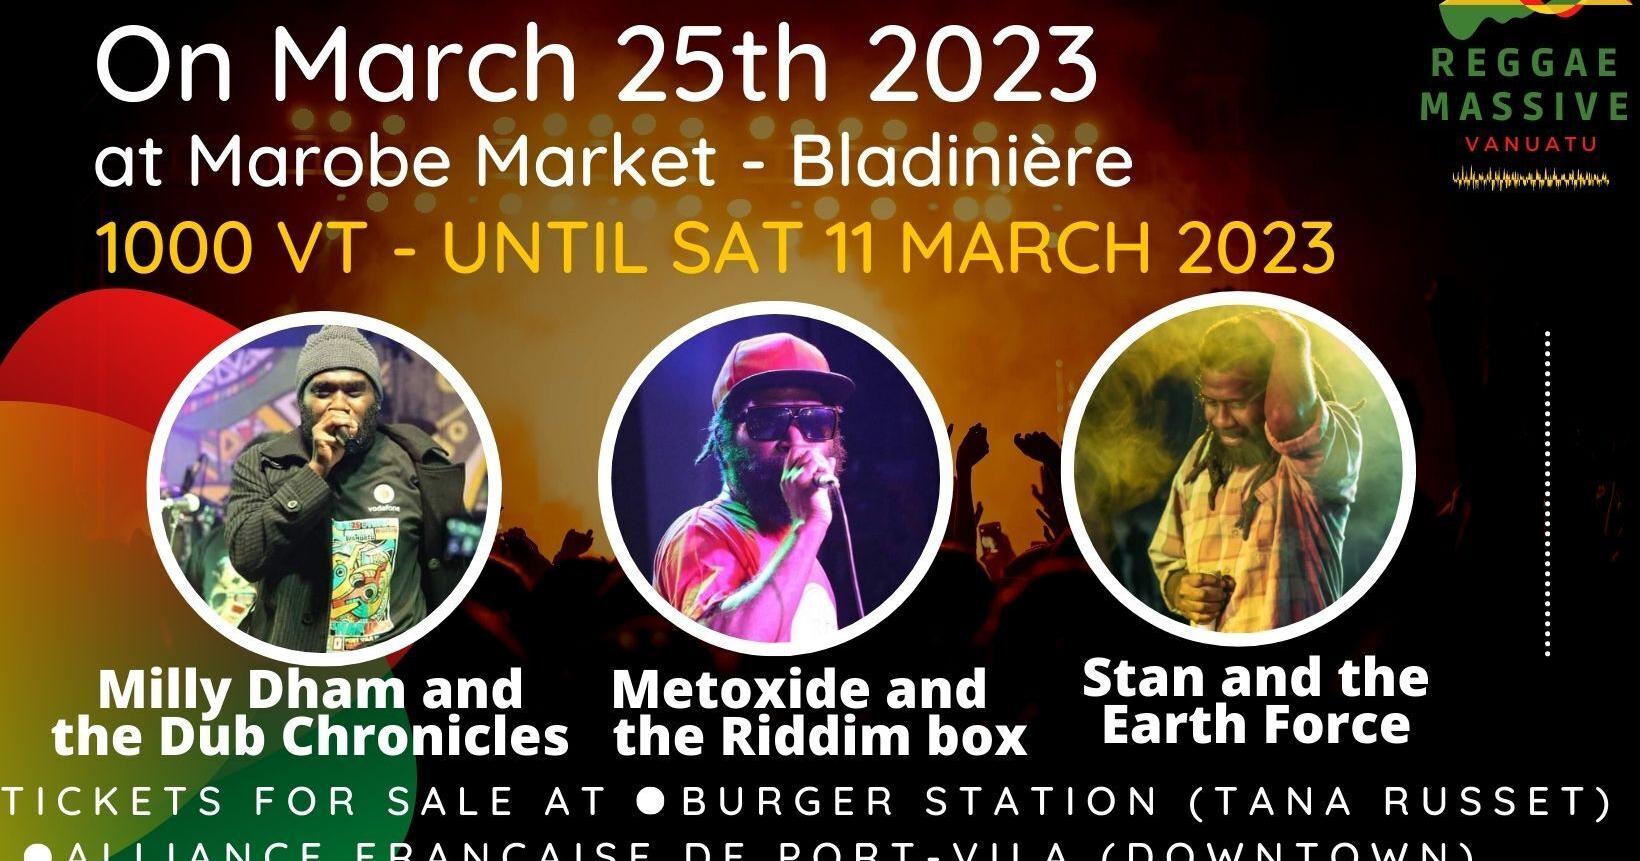 Reggae Massive event to take place this month